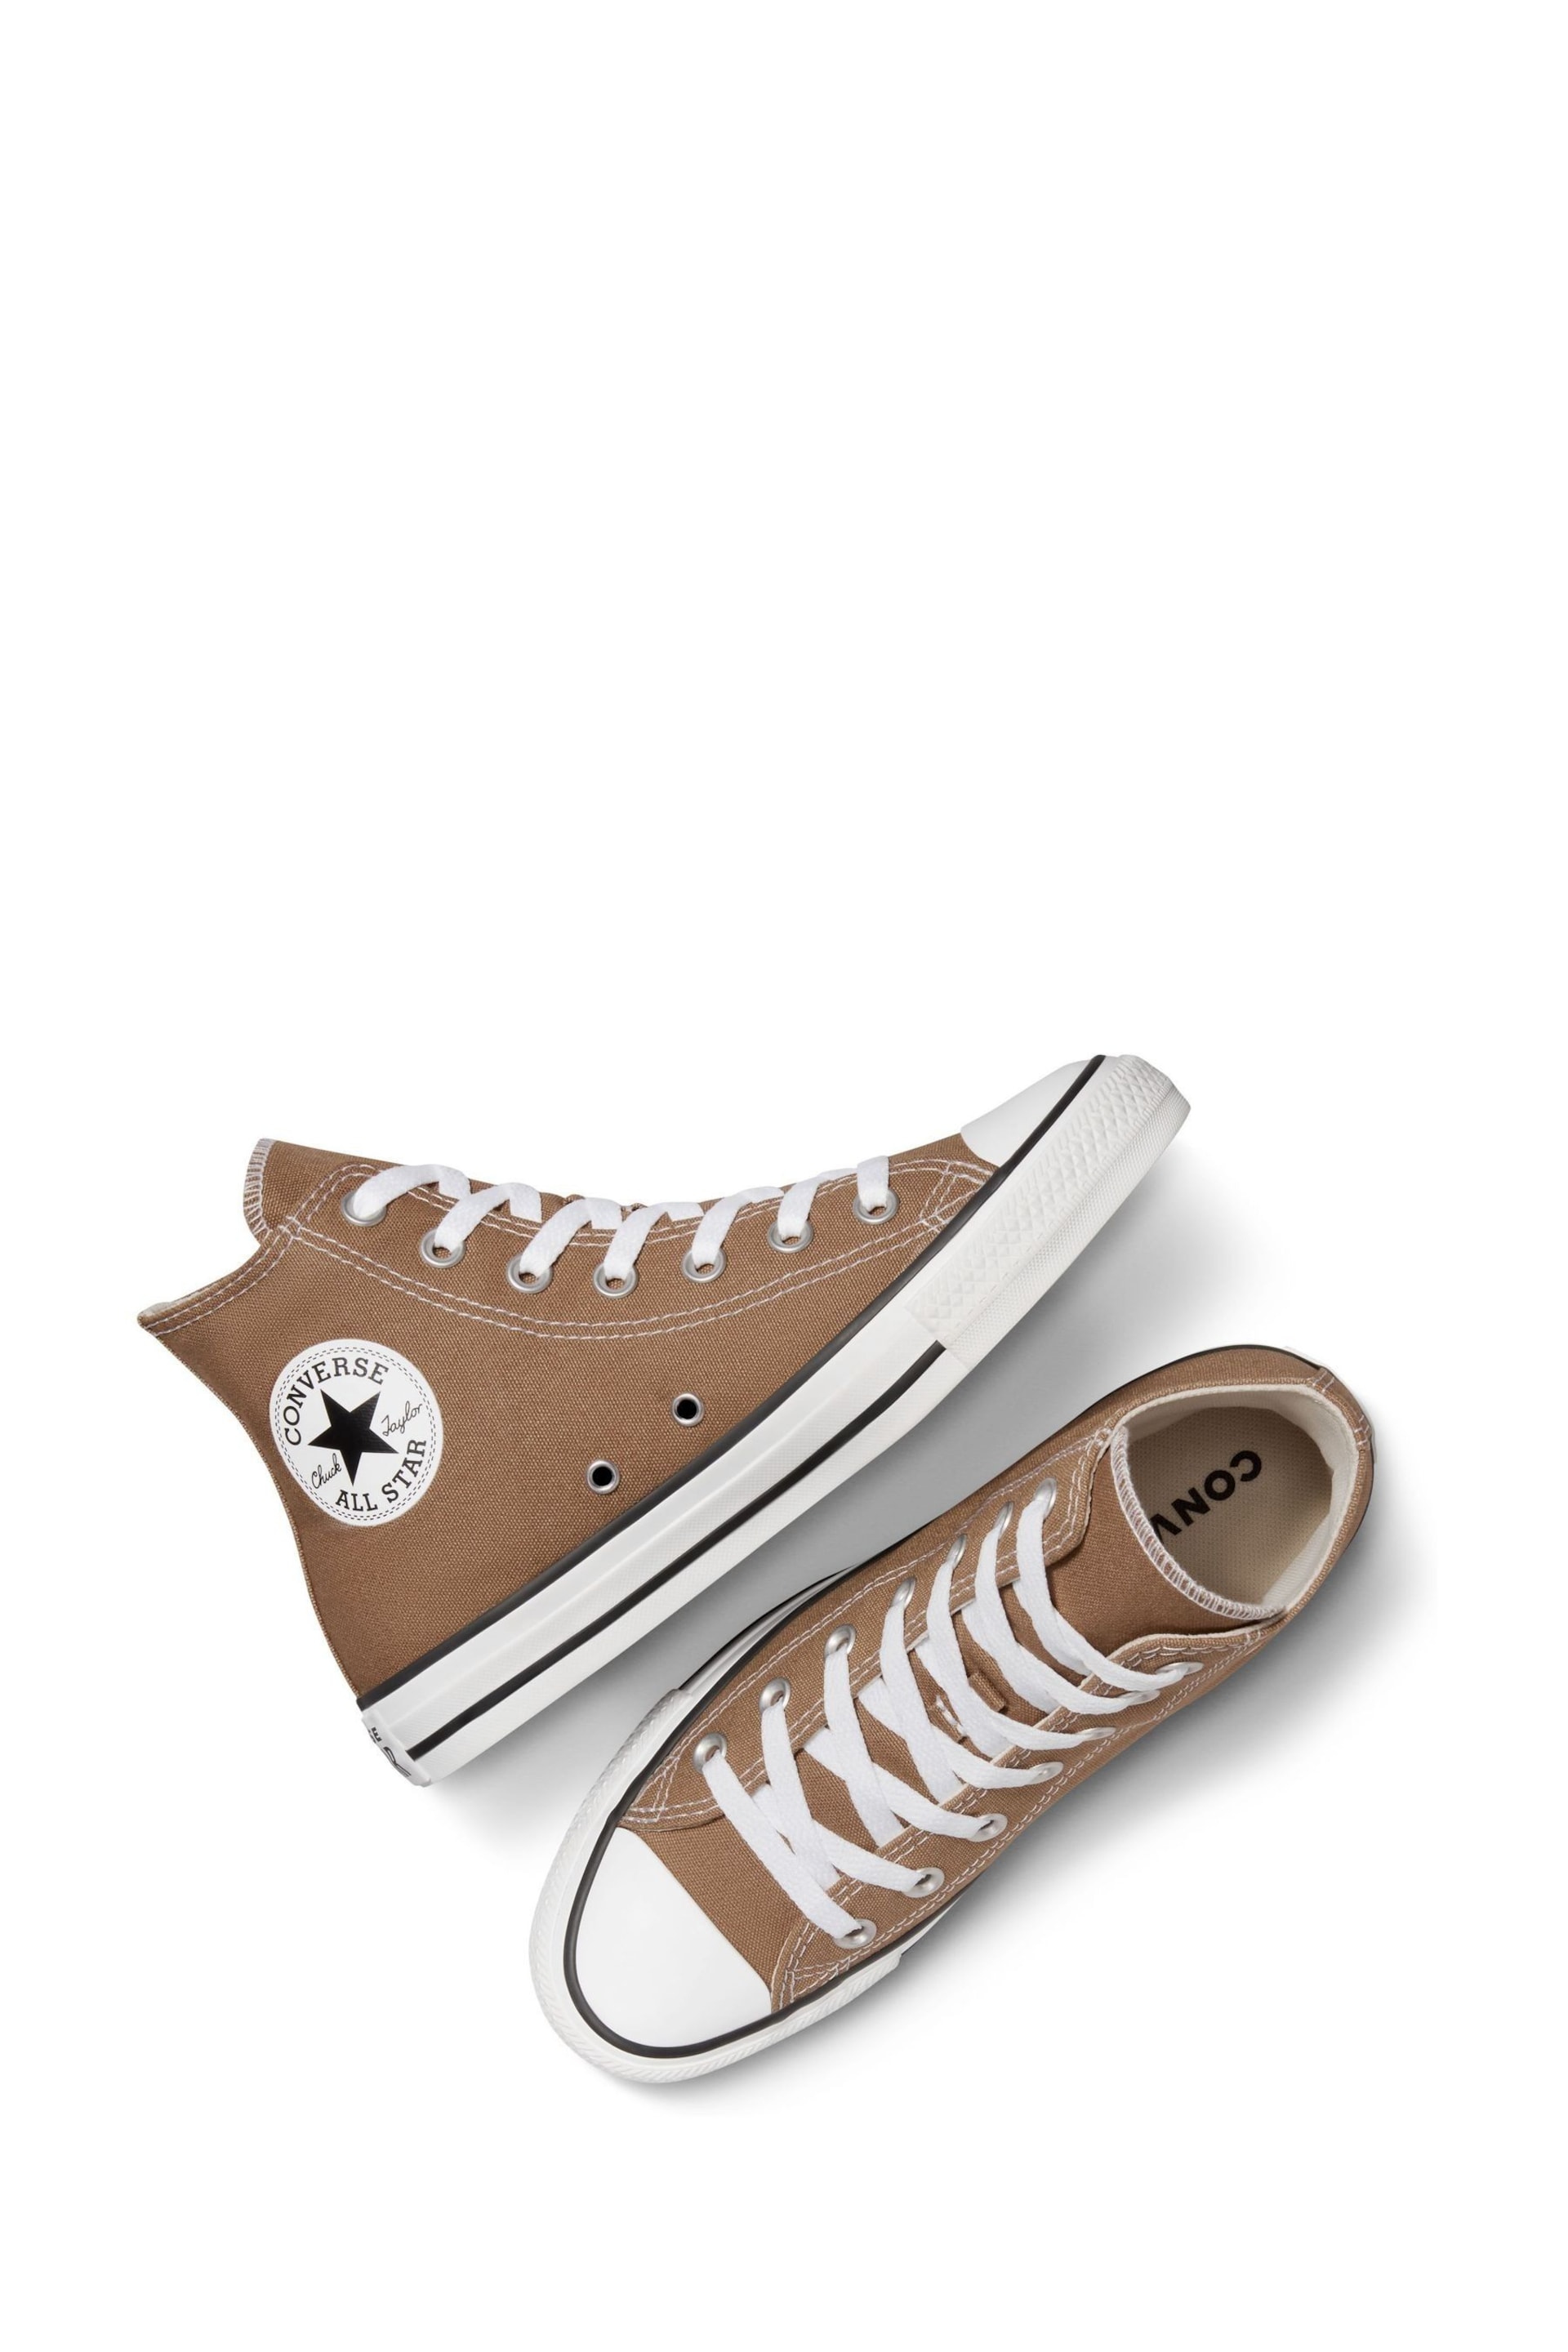 Converse Natural Chuck Taylor All Star Trainers - Image 9 of 9